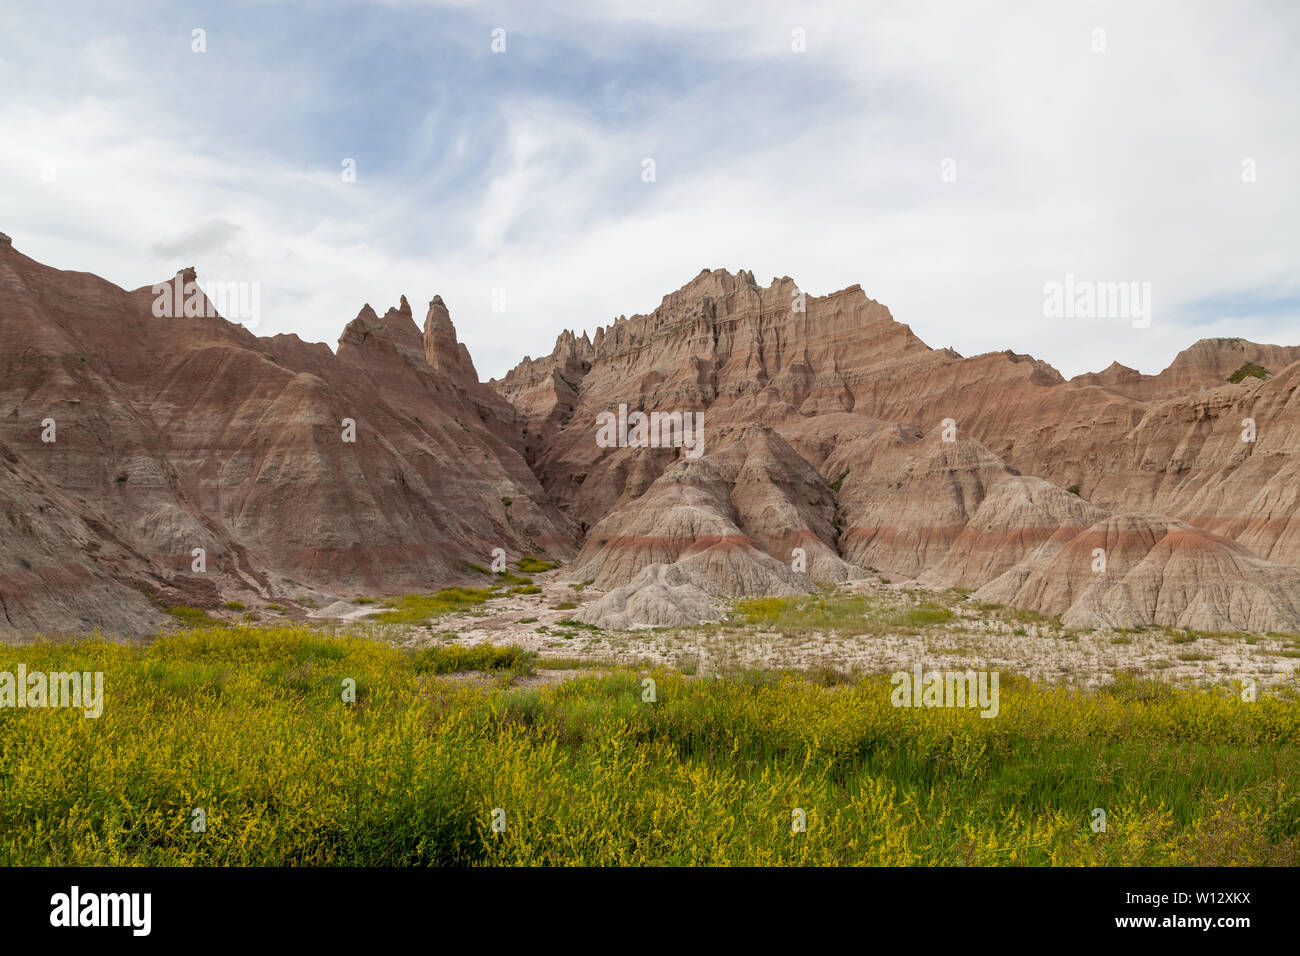 Dramatic mountain formations carved out by erosion showing layers of rocks with spring wildflowers below in Badlands National Park, South Dakota. Stock Photo